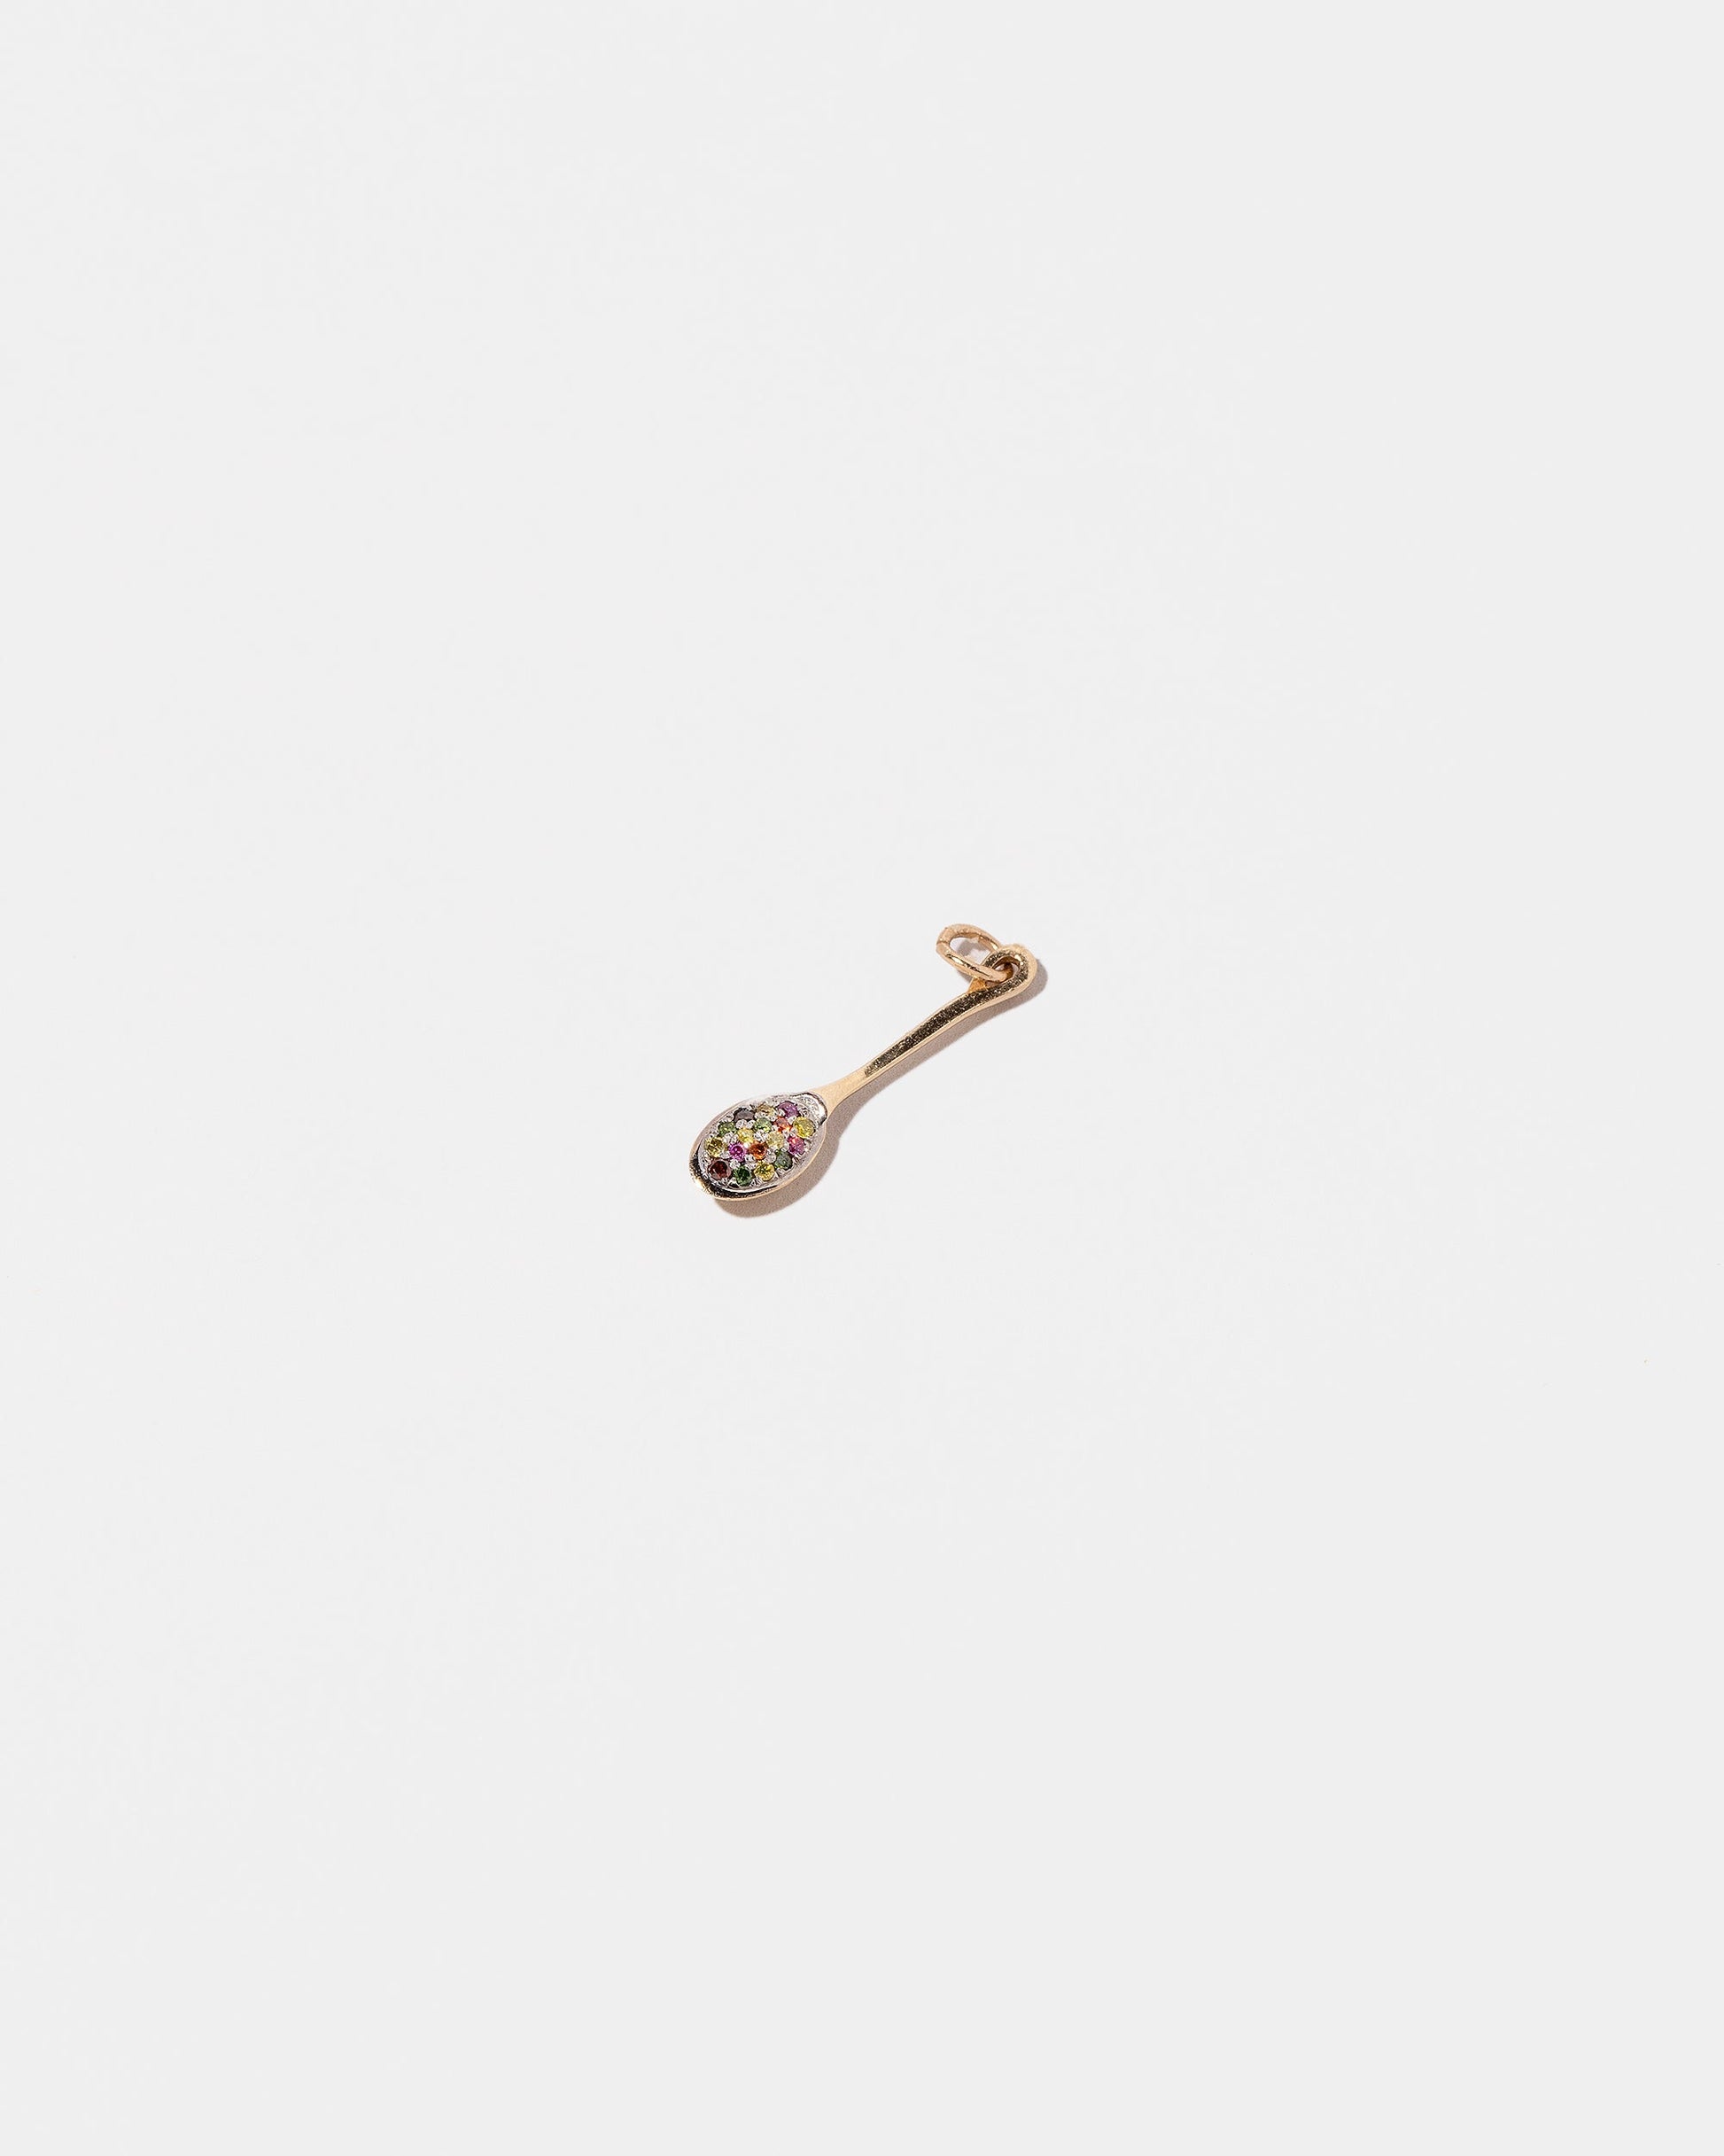  Cereal Spoon Charm on light color background.